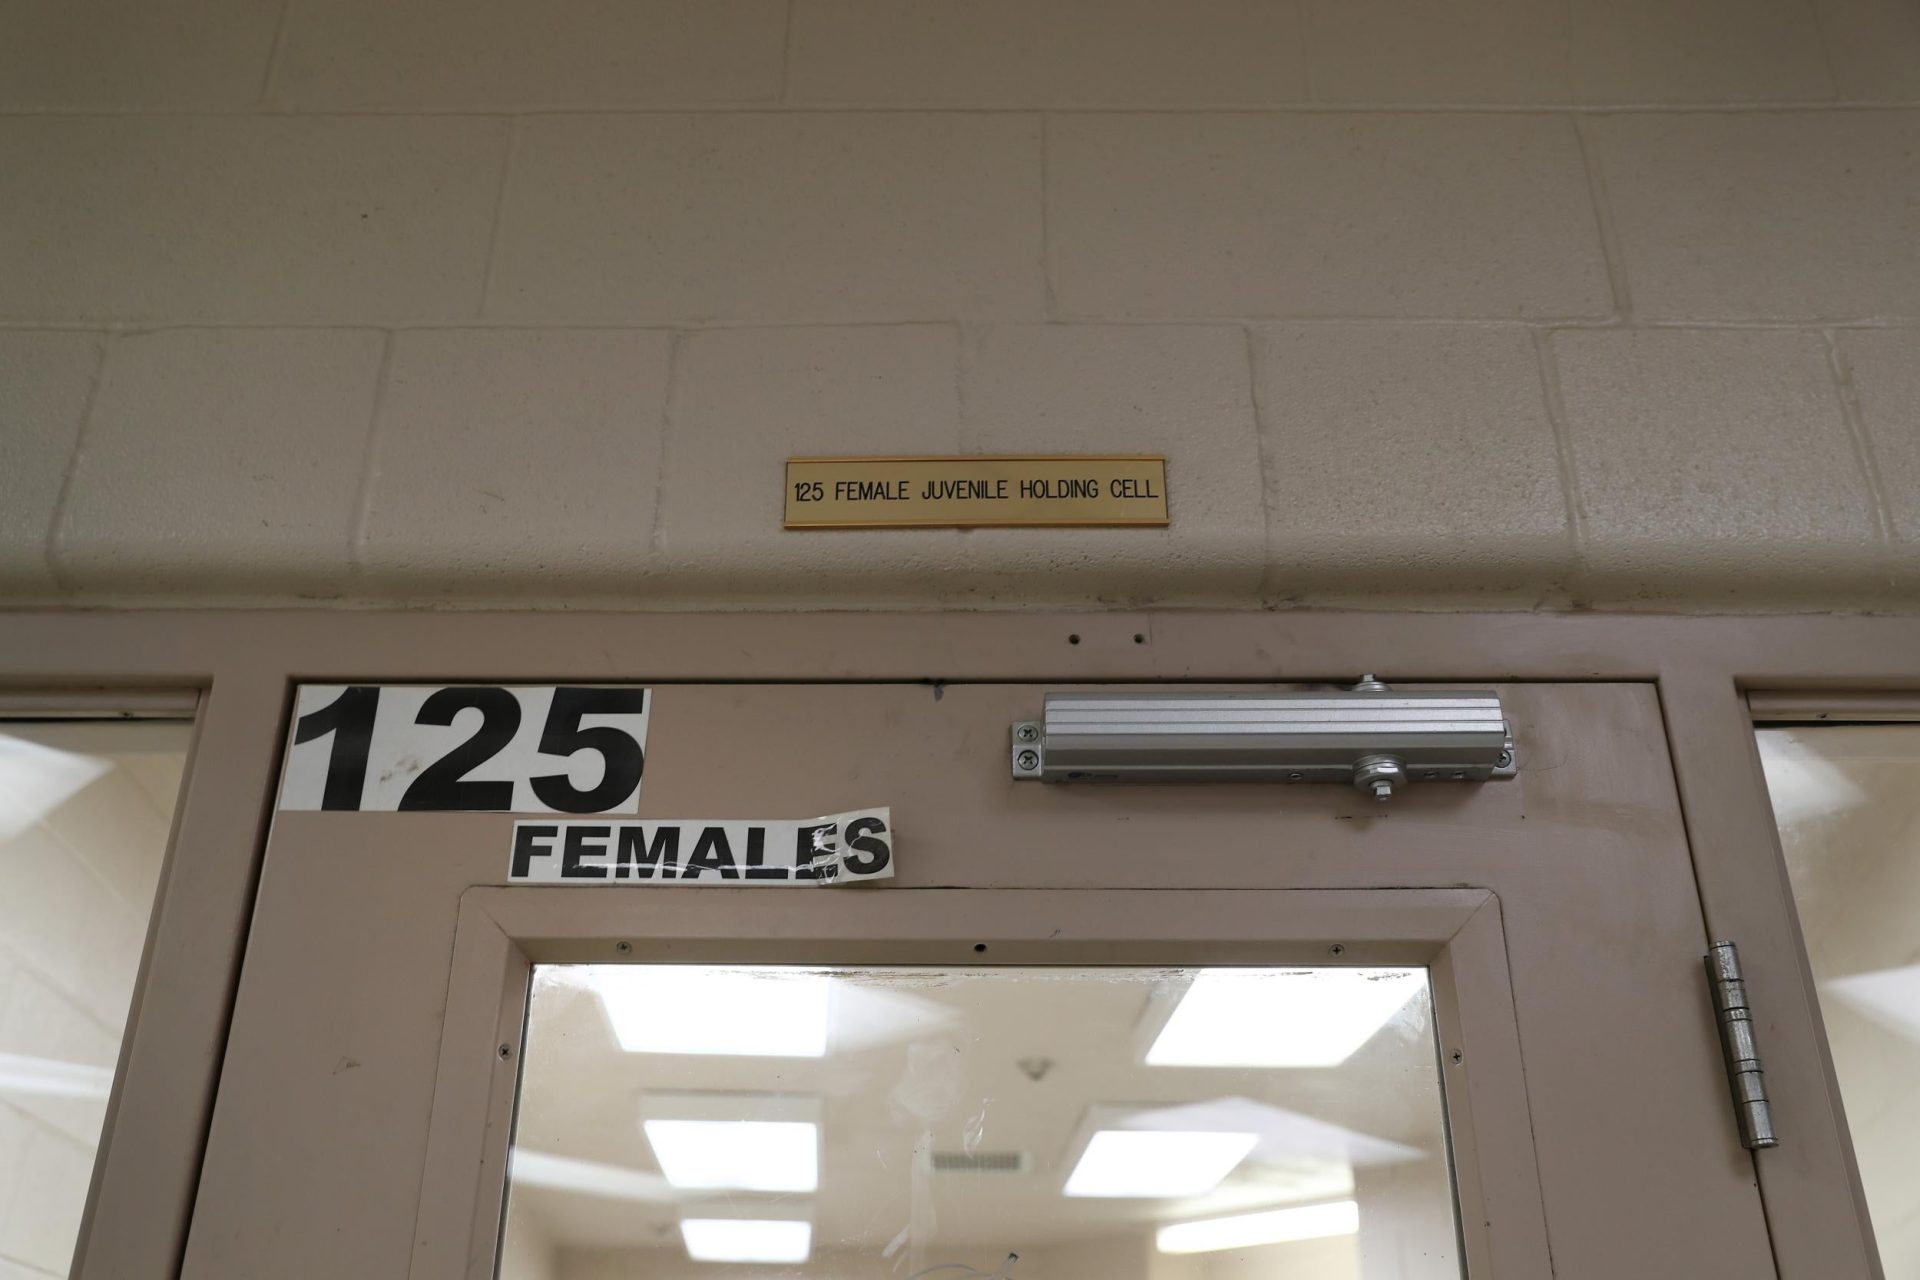 investigation of sexual abuse in federal womens prison guilty pleas and road to reform